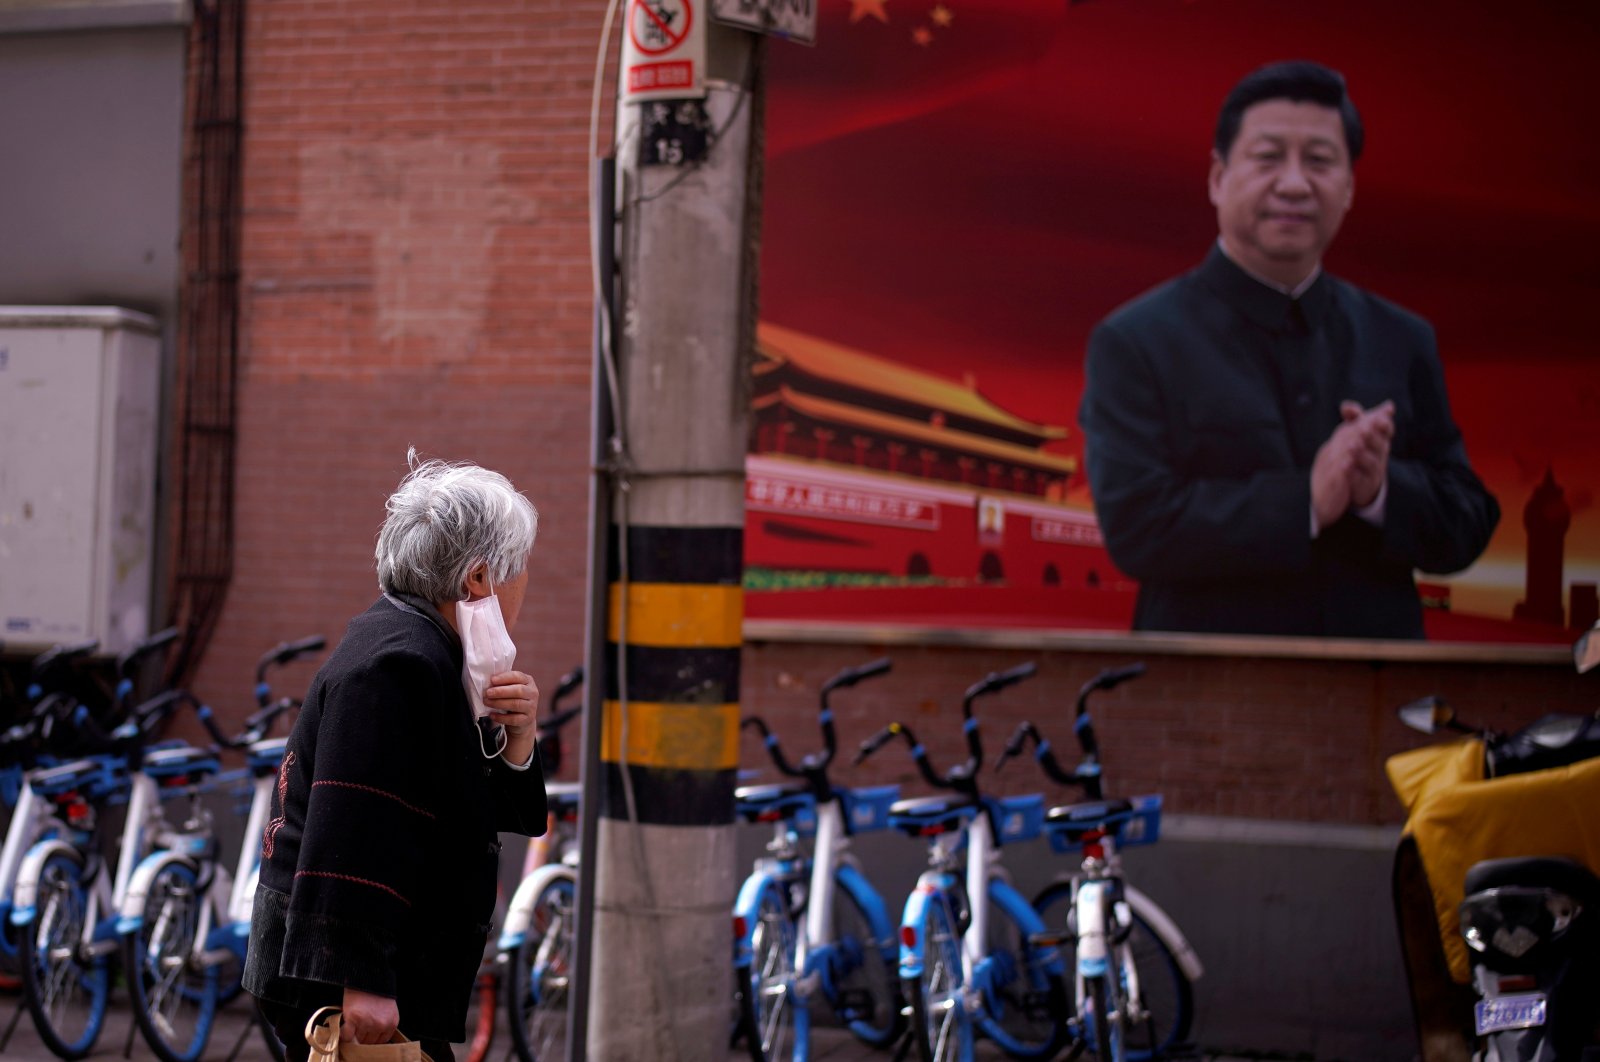 A woman with a protective mask is seen passing a portrait of Chinese President Xi Jinping on a street as the country is hit by an outbreak of the coronavirus, in Shanghai, China, March 12, 2020. (Reuters Photo)